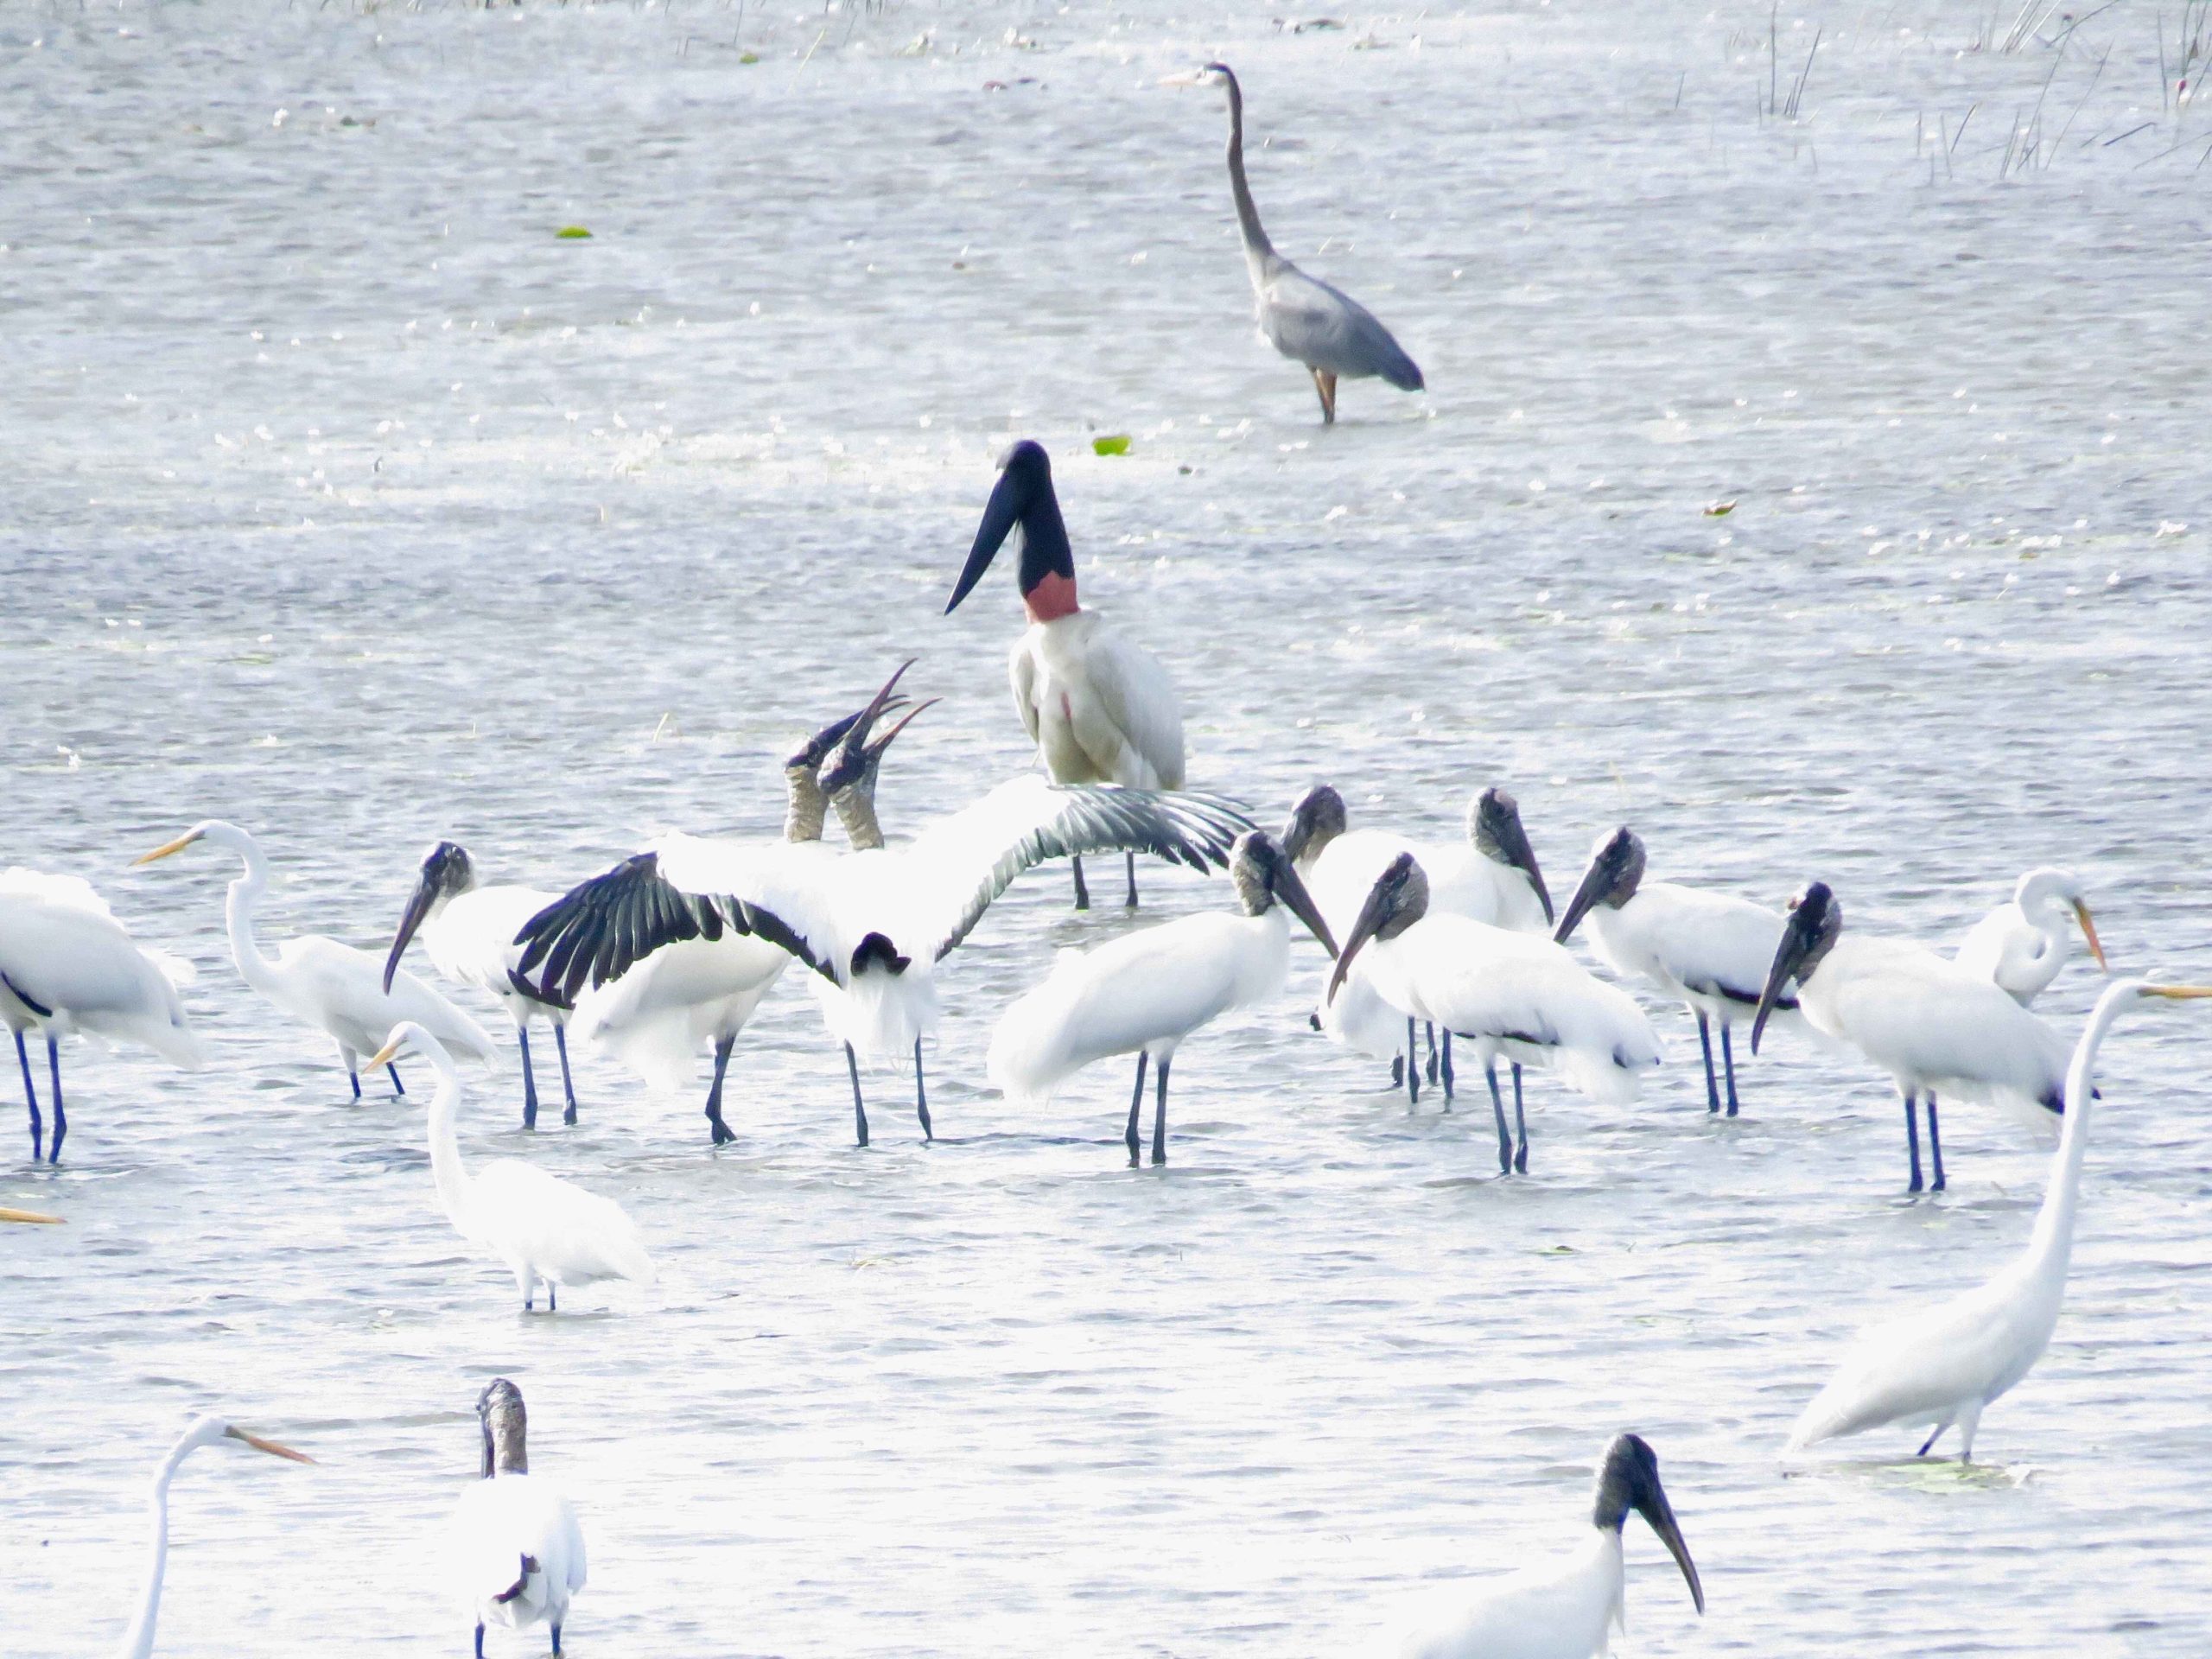 Guyana travel offers the opportunity to see Jabiru with Wood storks